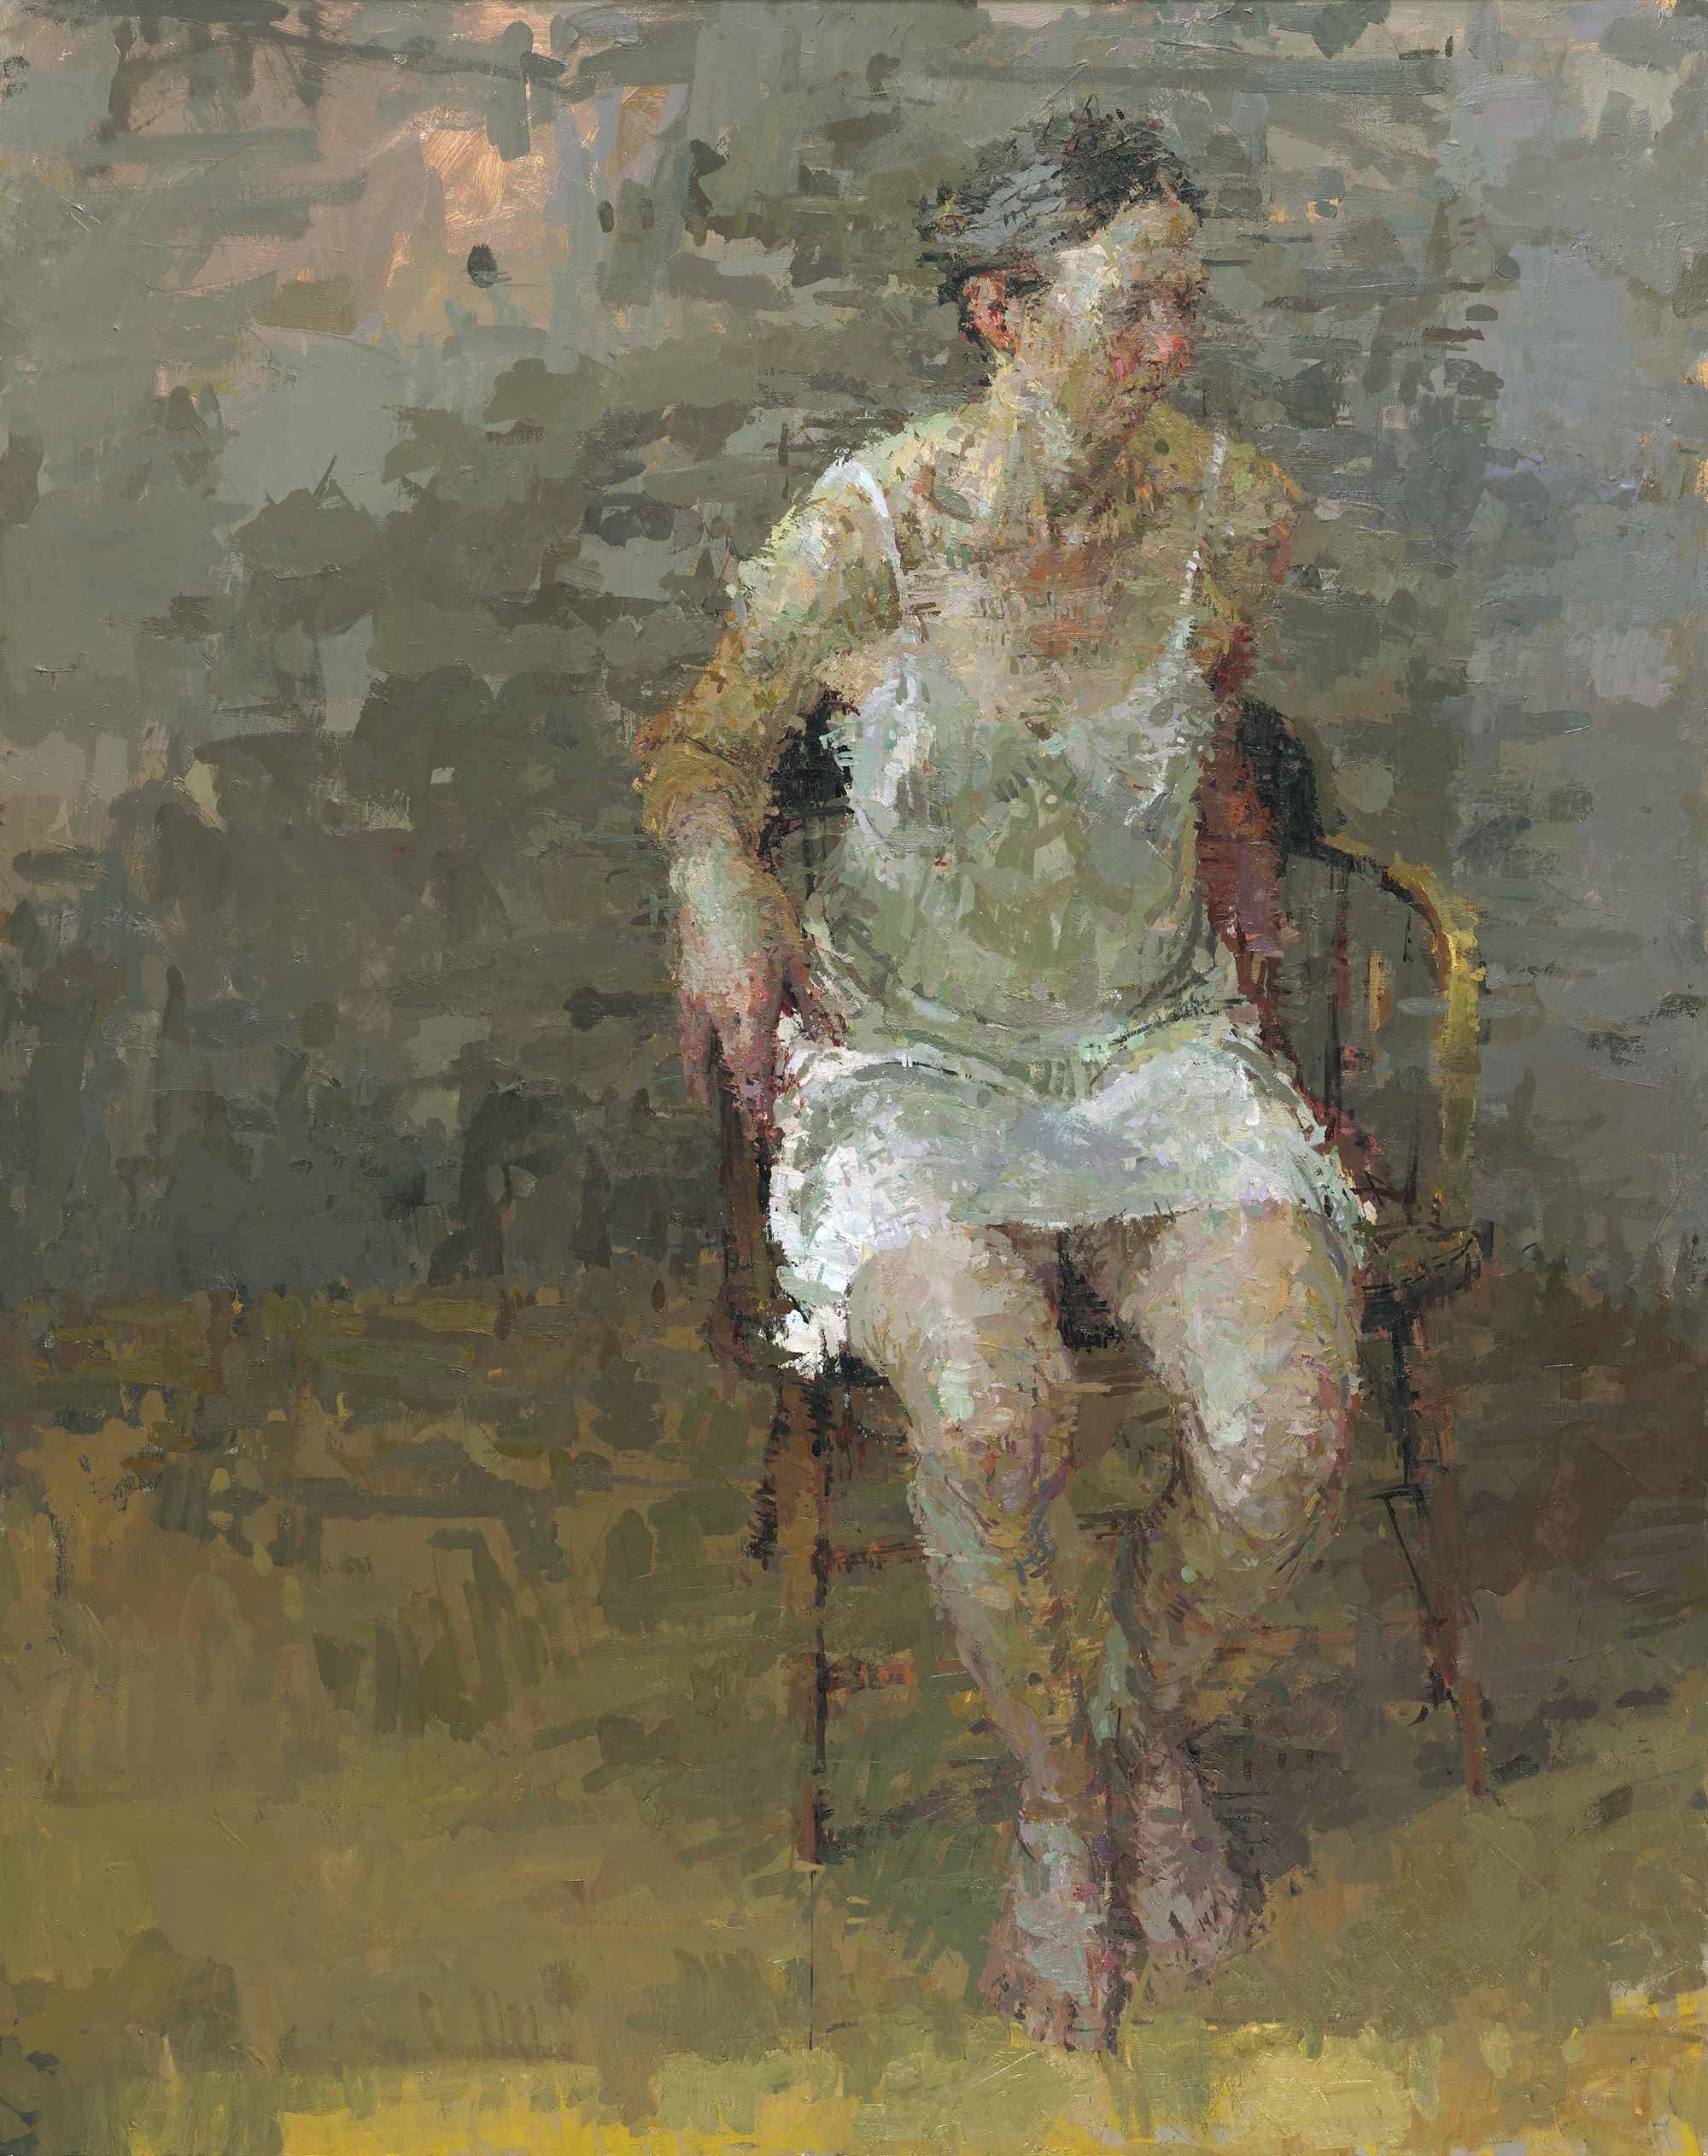 Ann Gale, Rachel, 2007, oil on canvas, 58 x 46 inches (courtesy of Ann Gale and Dolby Chadwick Gallery © Ann Gale)